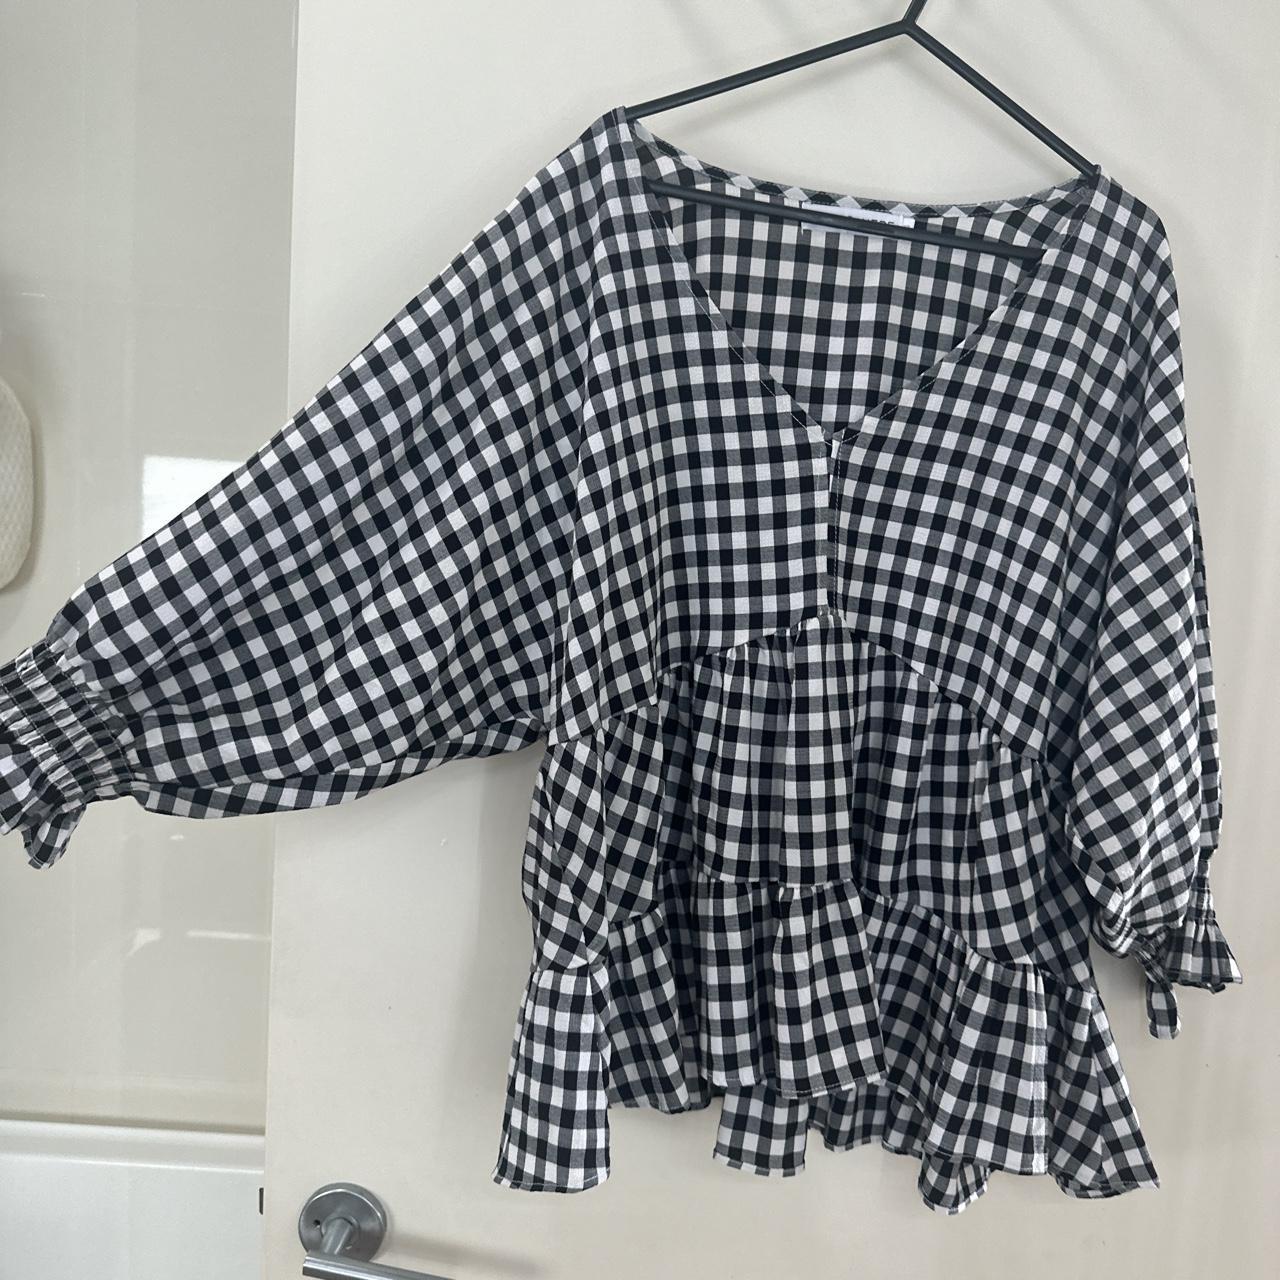 Black and white gingham top. Atmos&Here size 12 - Depop